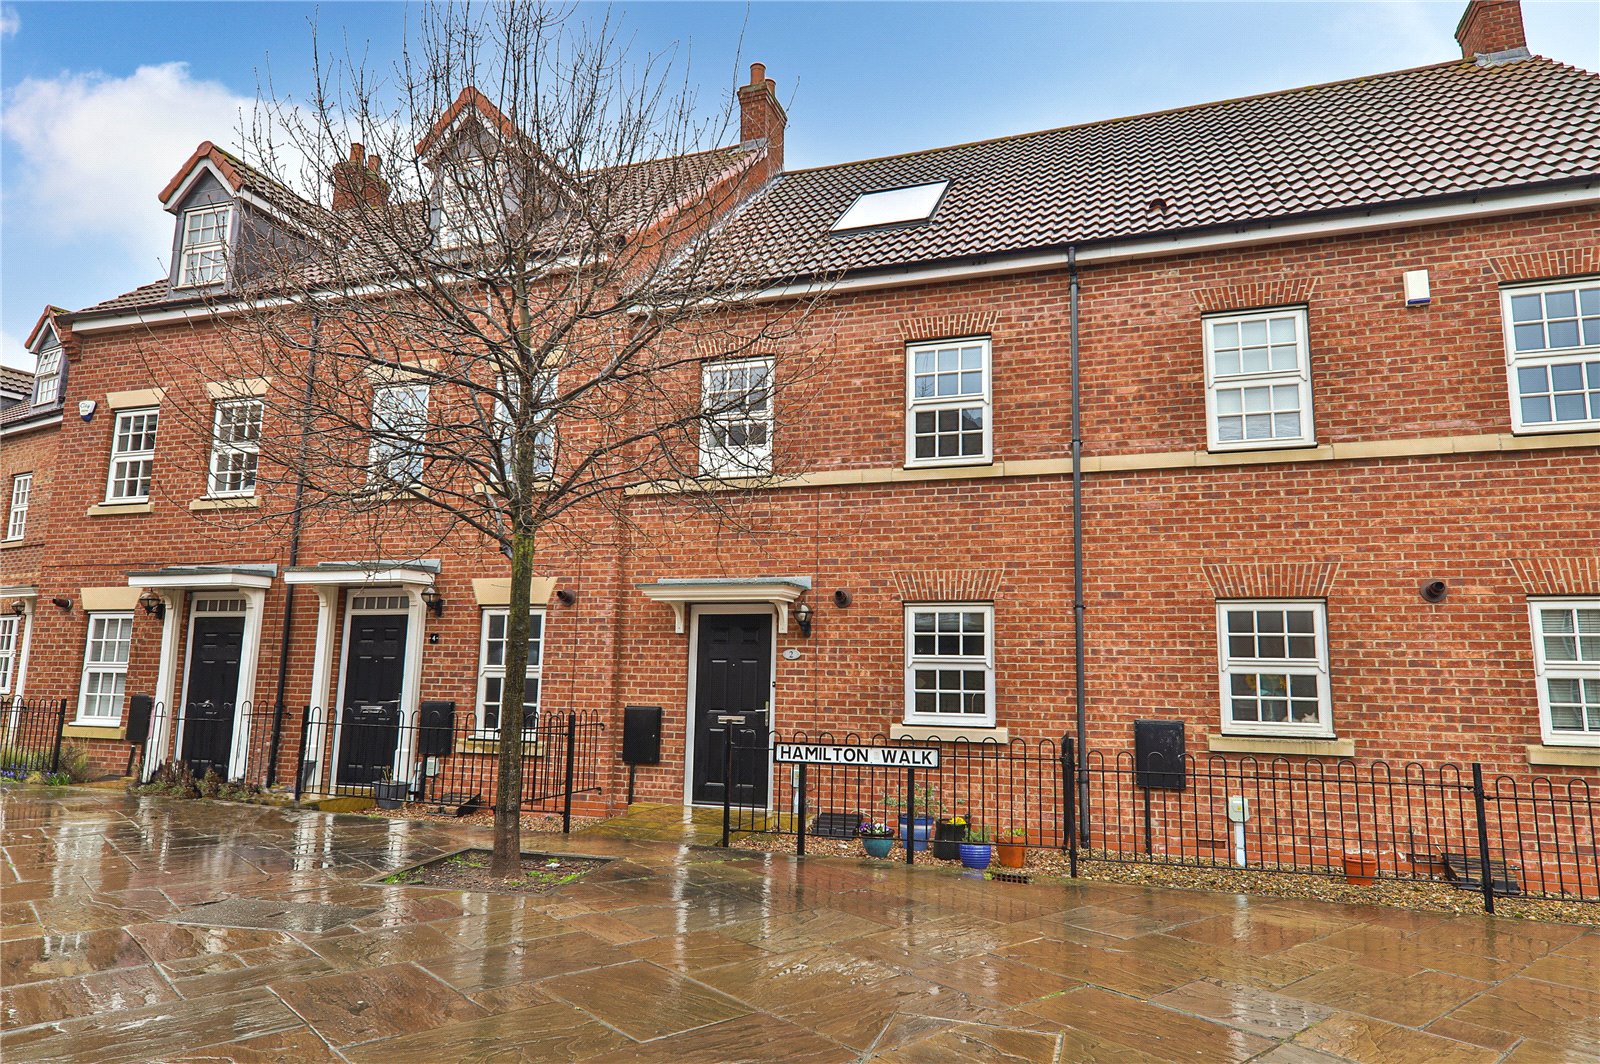 3 bed house for sale in Hamilton Walk, Beverley, HU17